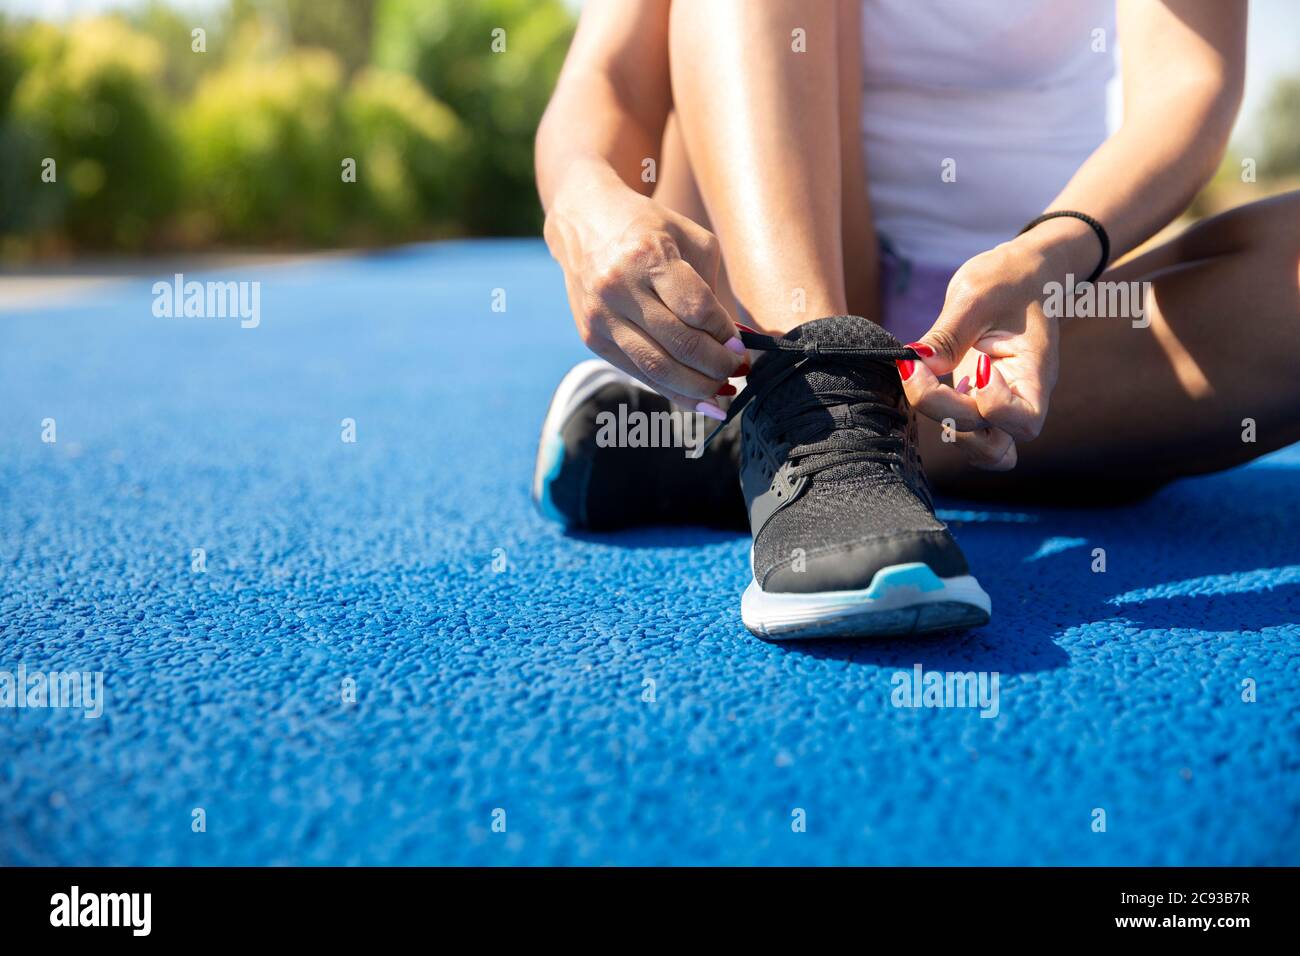 Close-up of a sportswoman tying her shoe laces before running. Space for text. Selective focus. Concept of sport and healthy life. Stock Photo